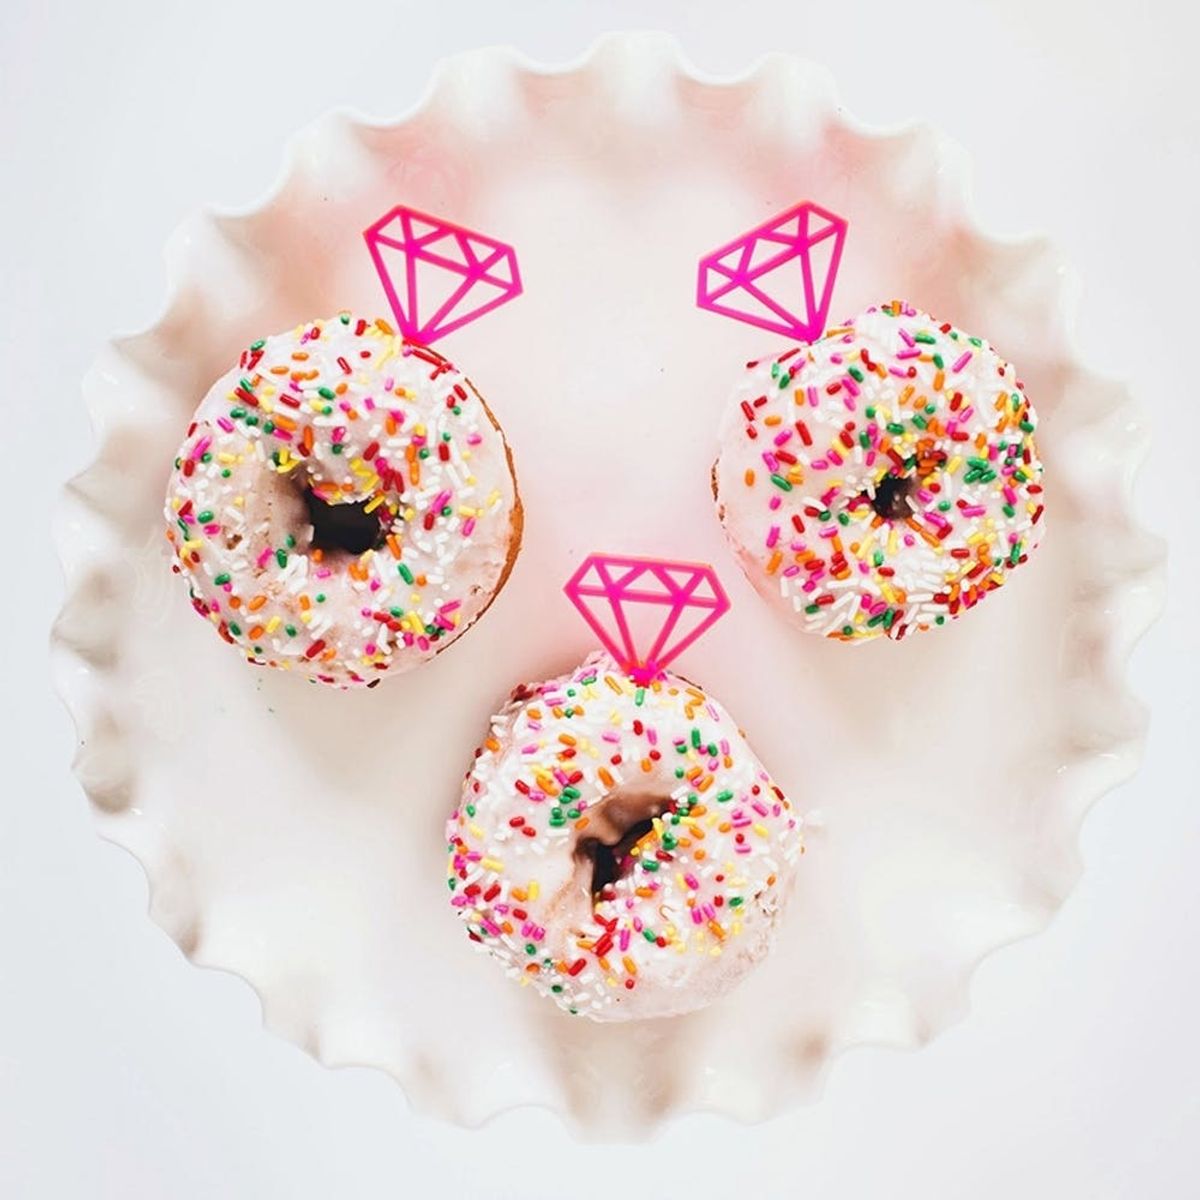 15 Gift Ideas for People Who Have a Sweet Tooth for Donuts